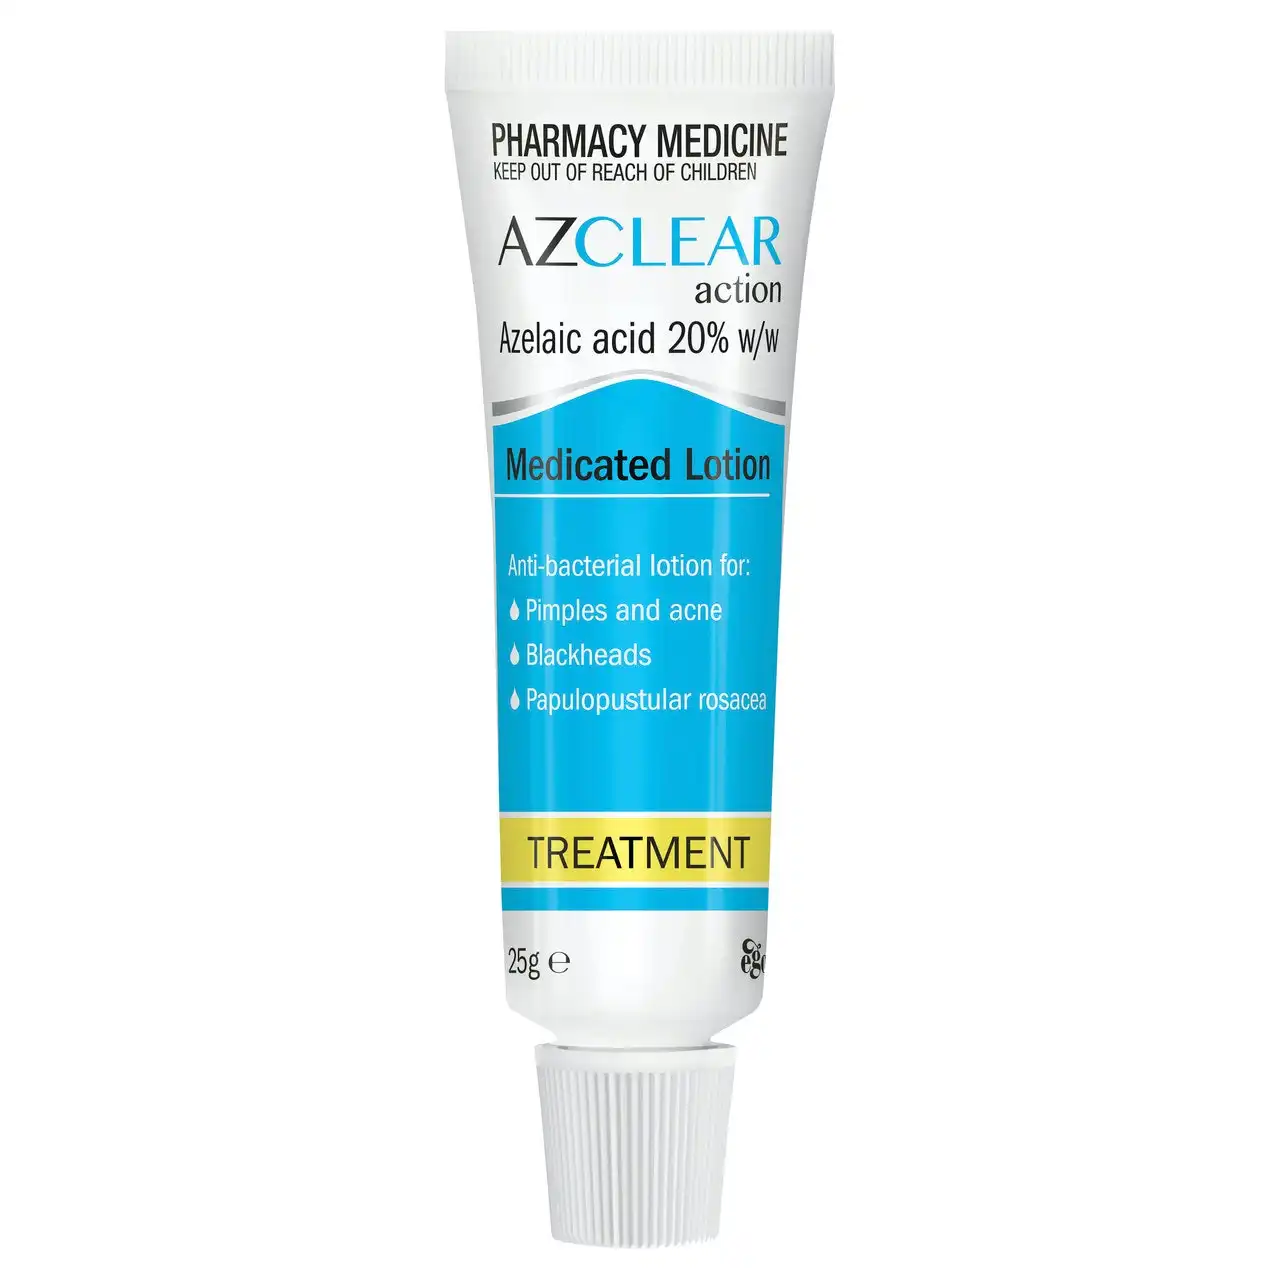 Azclear Action Medicated Lotion 25g